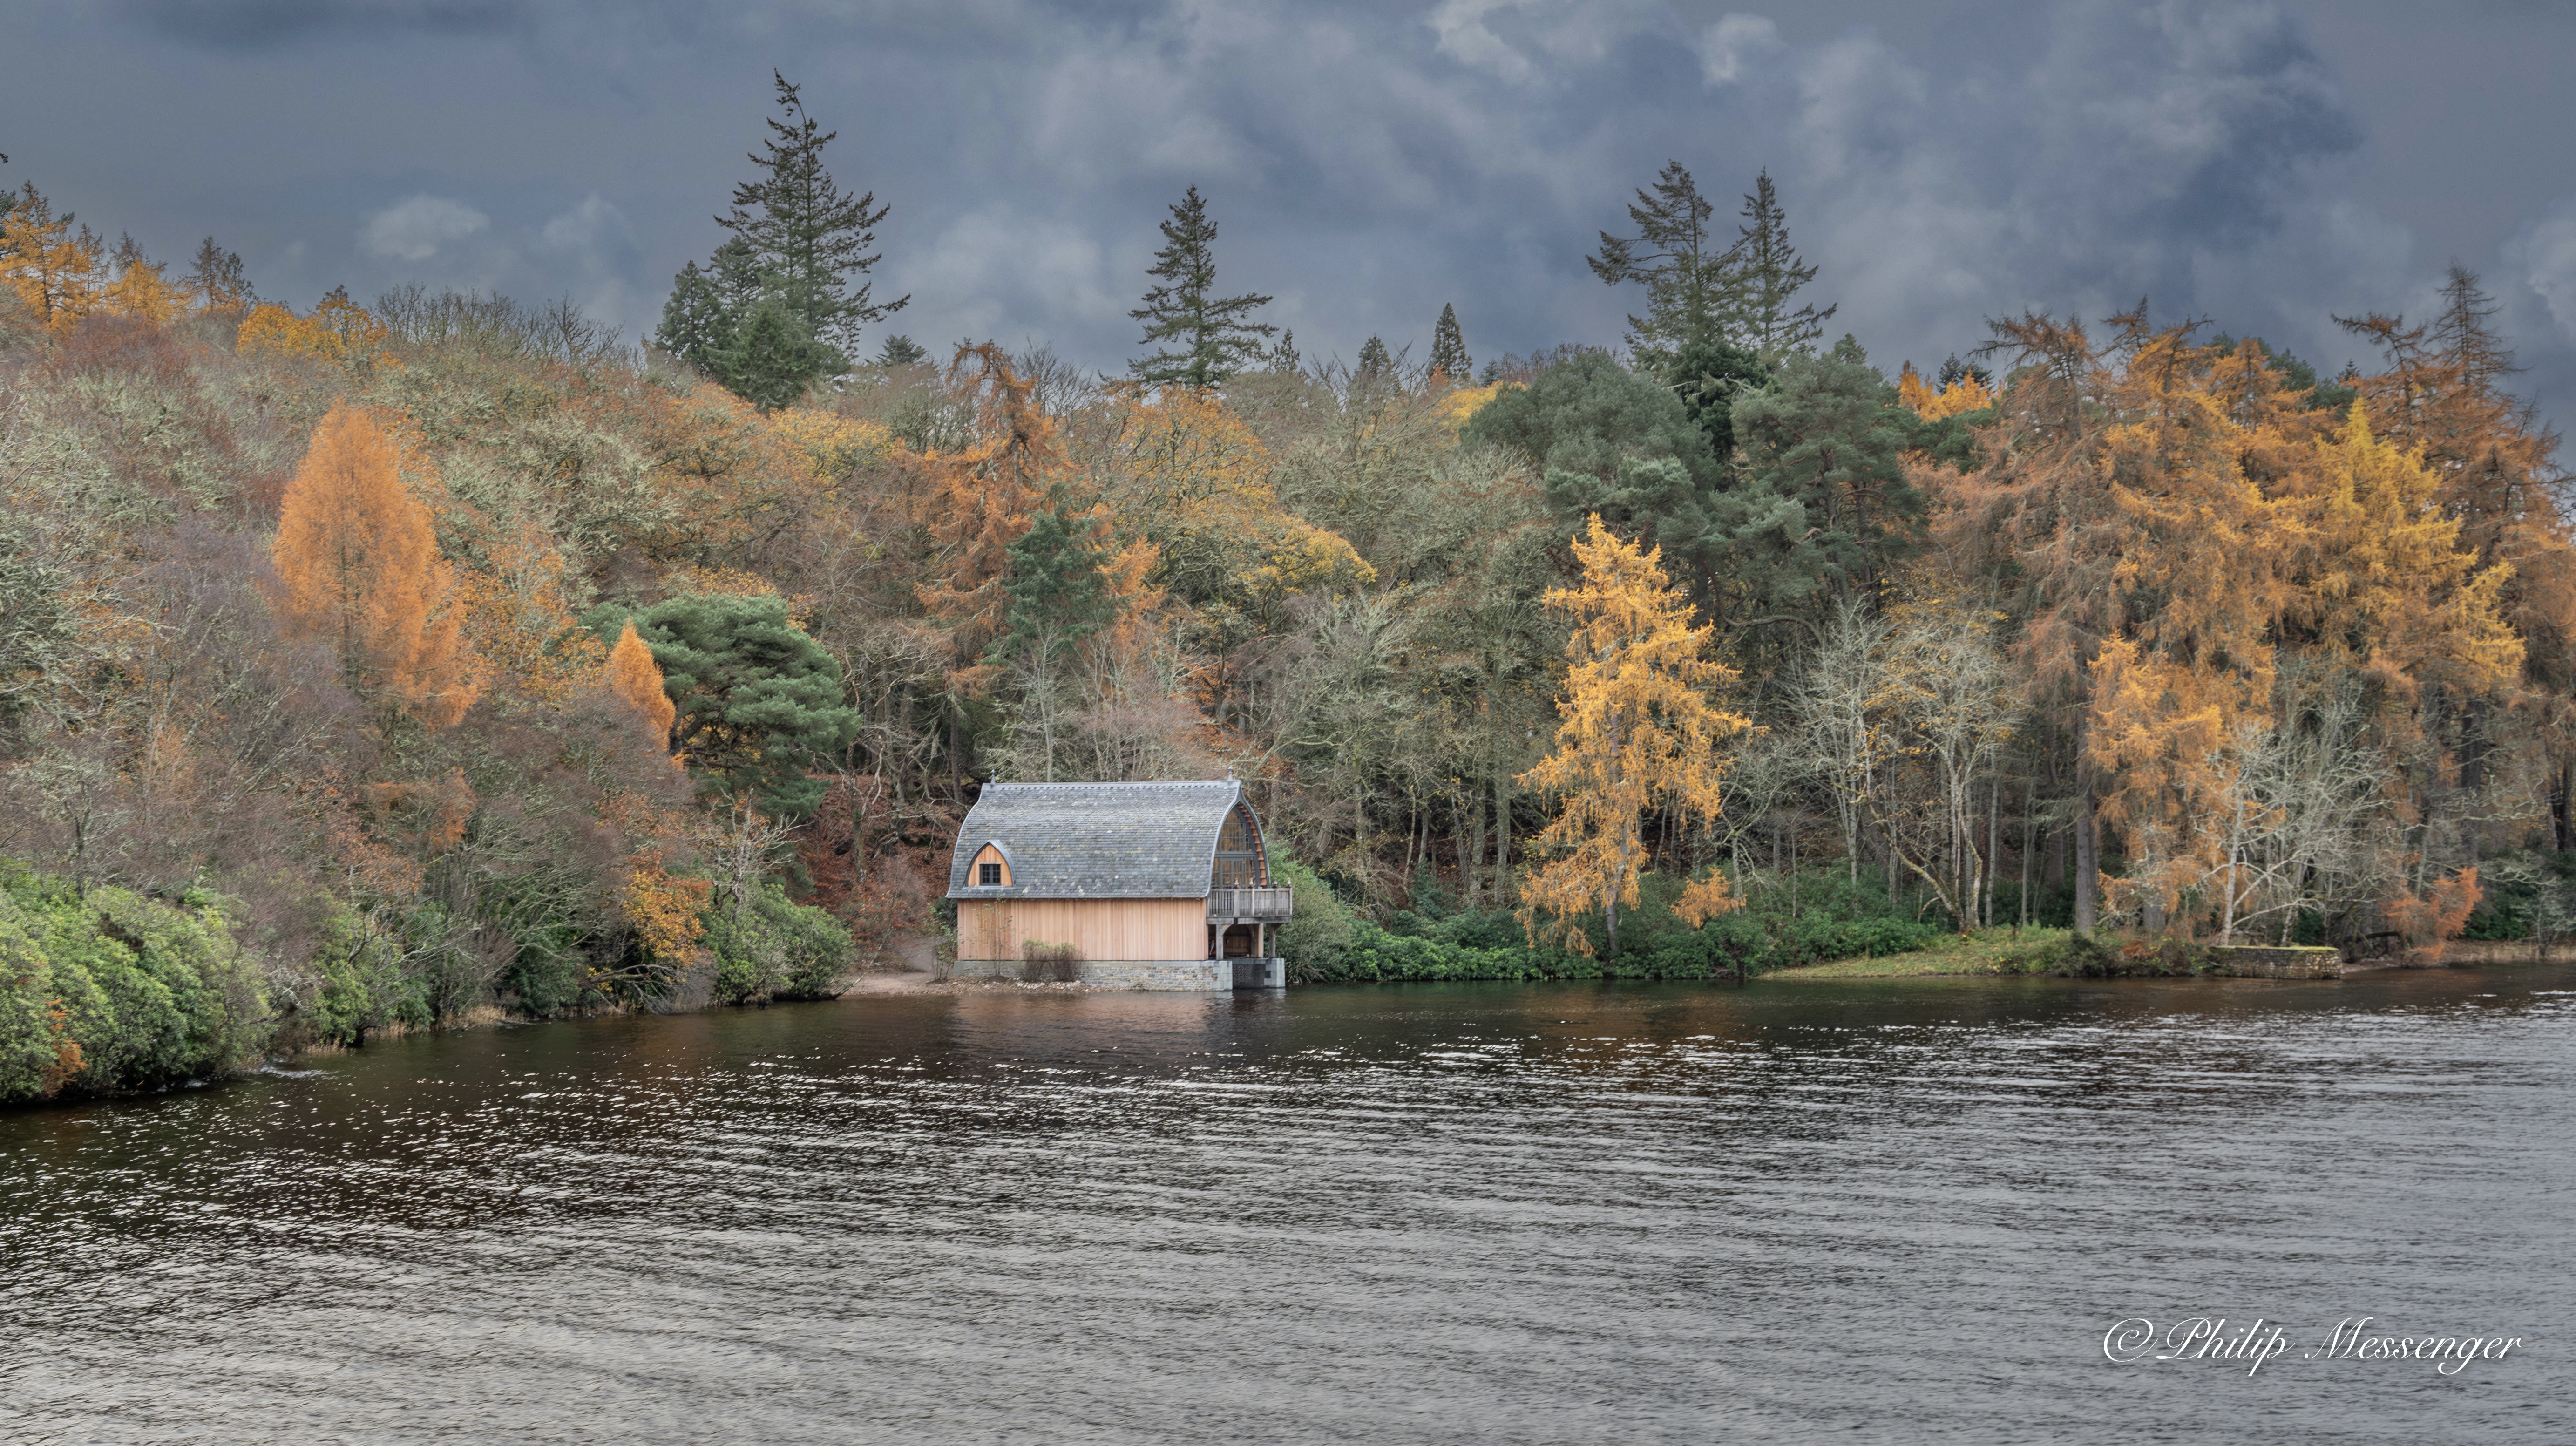 A boat house surrounded by accents of Autumn colours on the shore of Loch Ness Scotland.